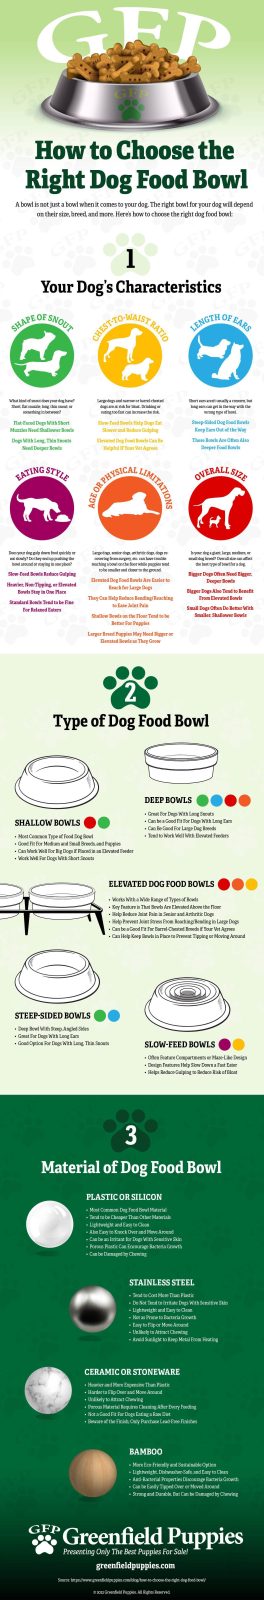 How to Choose the Right Dog Food Bowl - Infographic by Greenfield Puppies